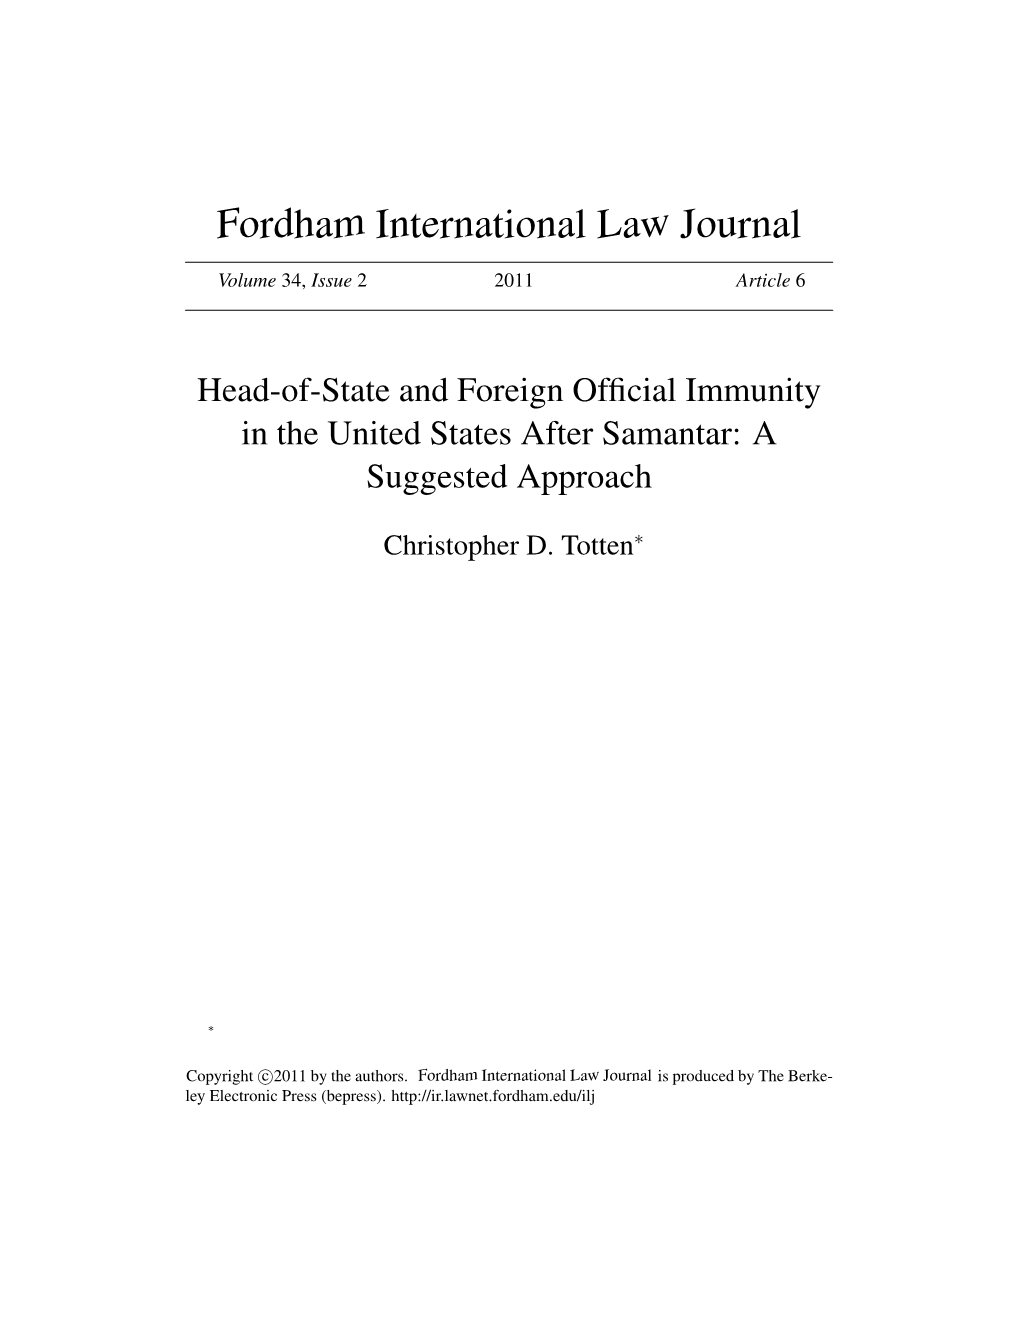 Head-Of-State and Foreign Official Immunity in the United States After Samantar: a Suggested Approach